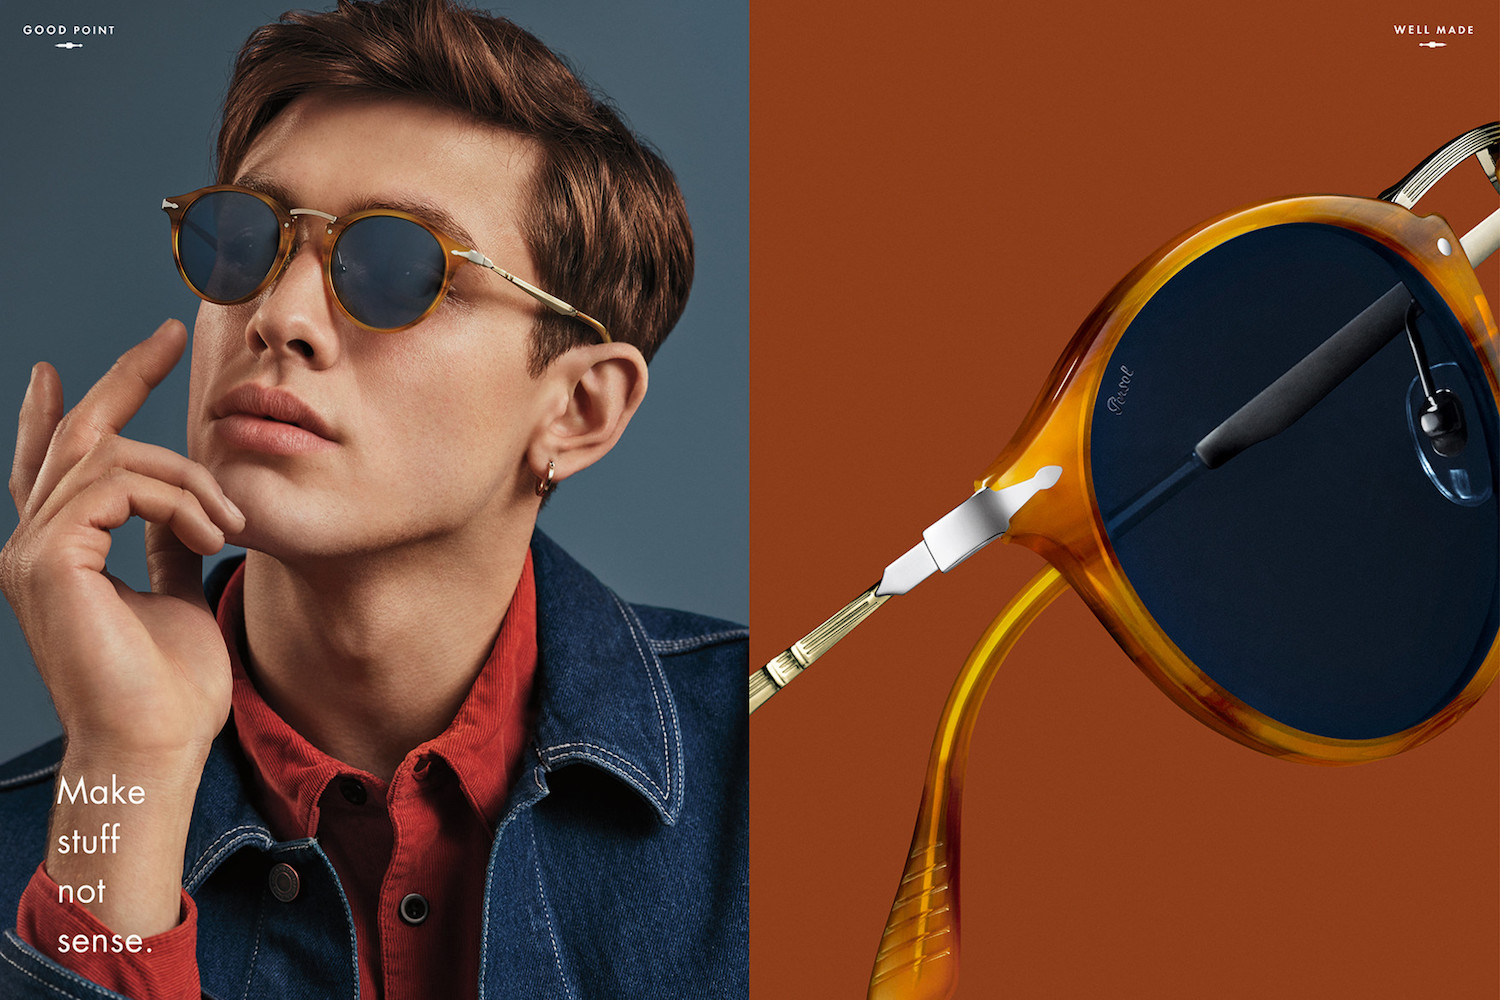 Persol "Good Point, Well Made"